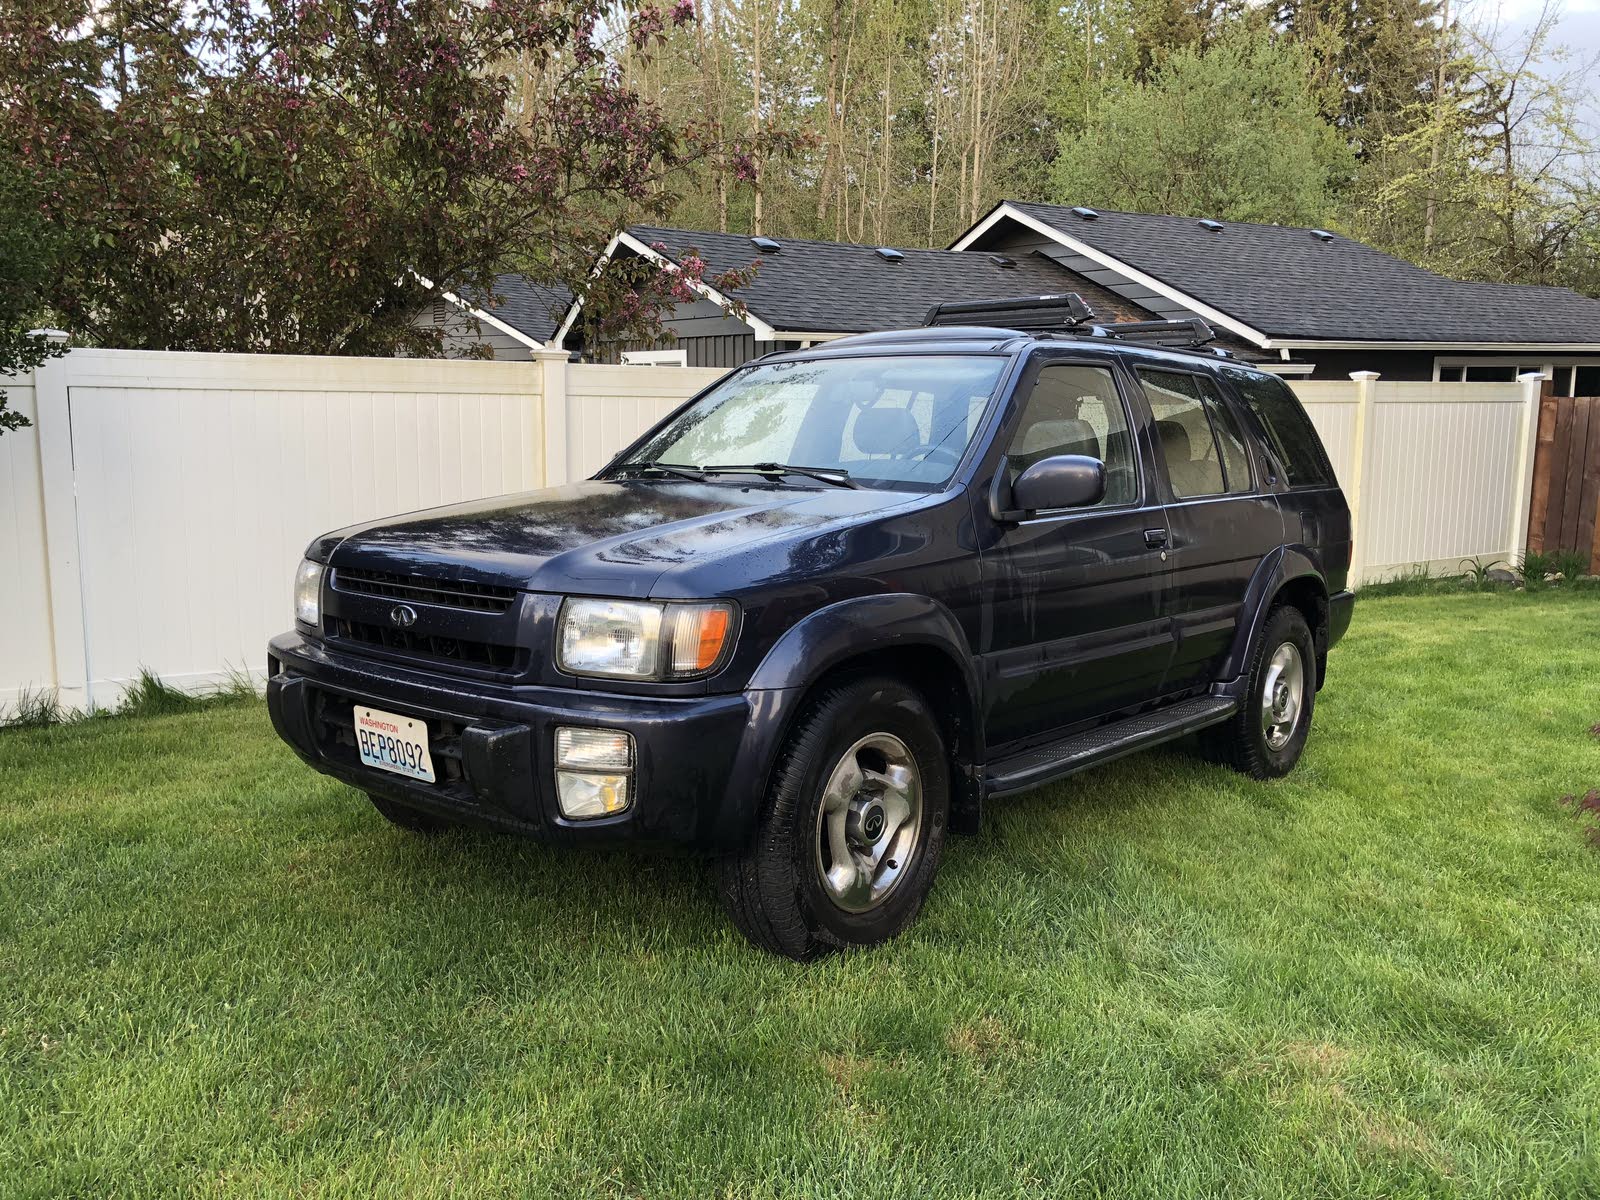 Ford Bronco Throwback Thursday!!! Let's see those trade-ins vs what you have now photos!!! 9 1997 infiniti qx4